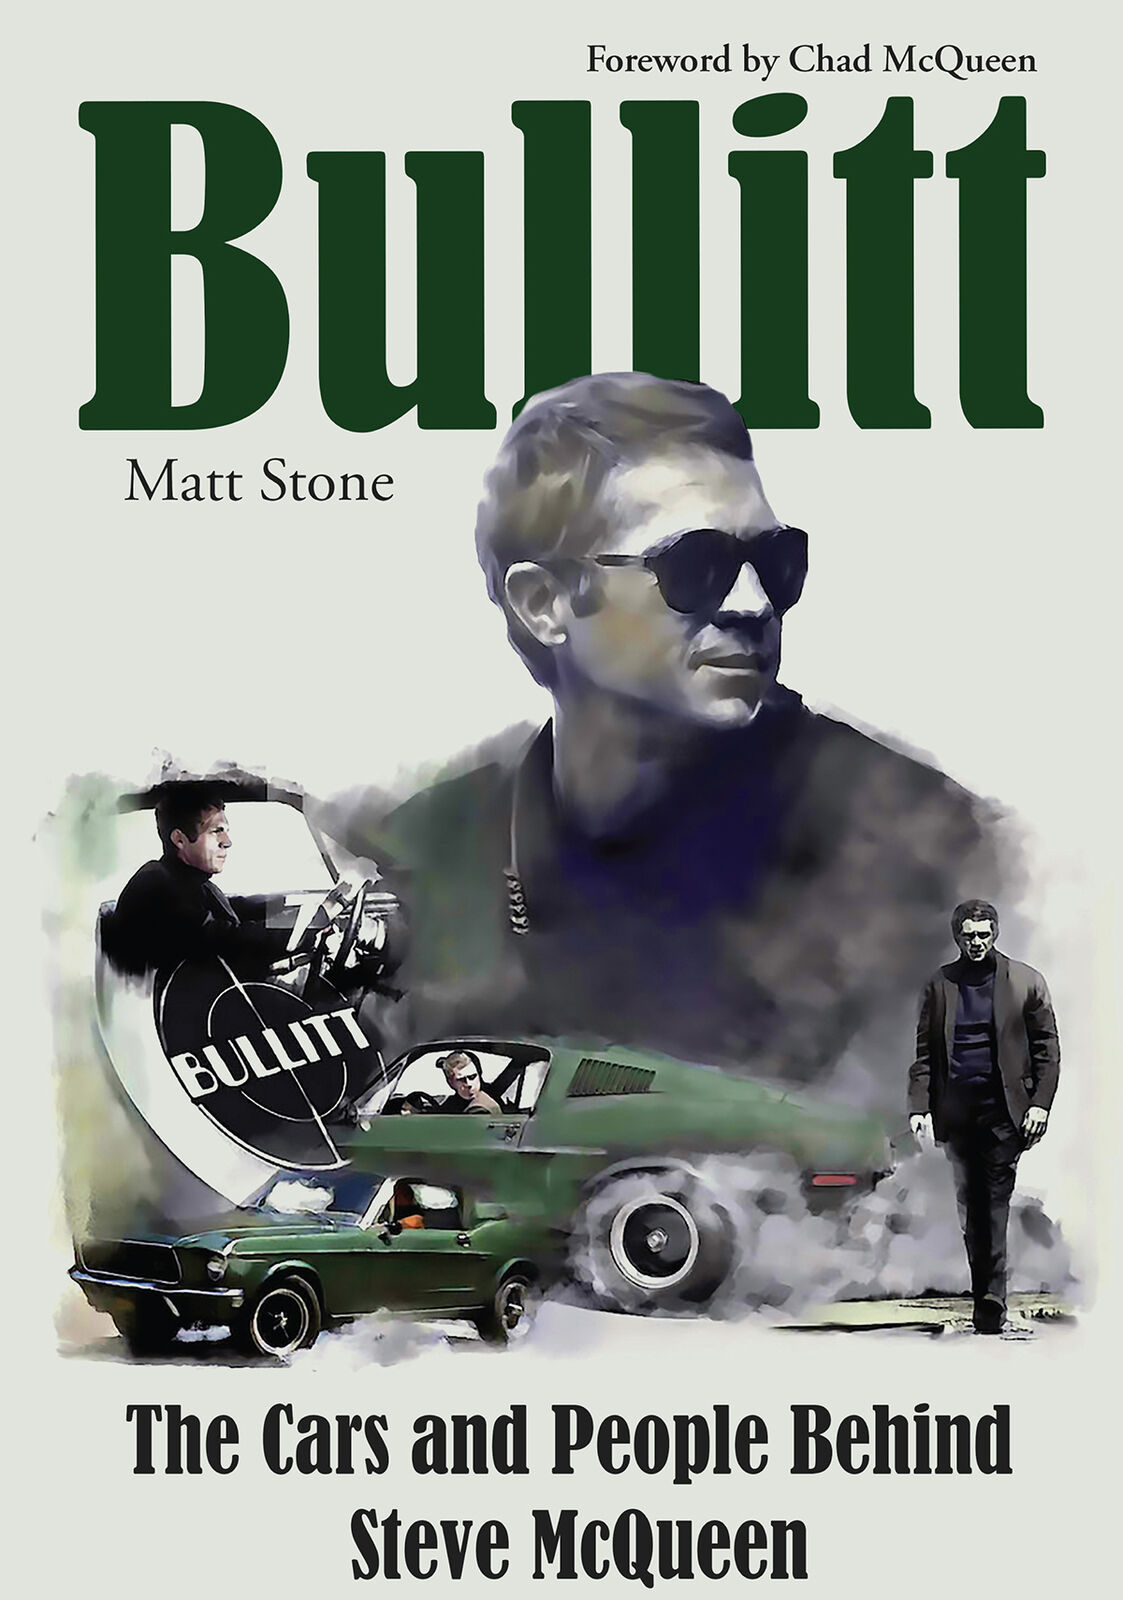 Steve McQueen Ford Mustang Bullitt The Cars and People Behind book